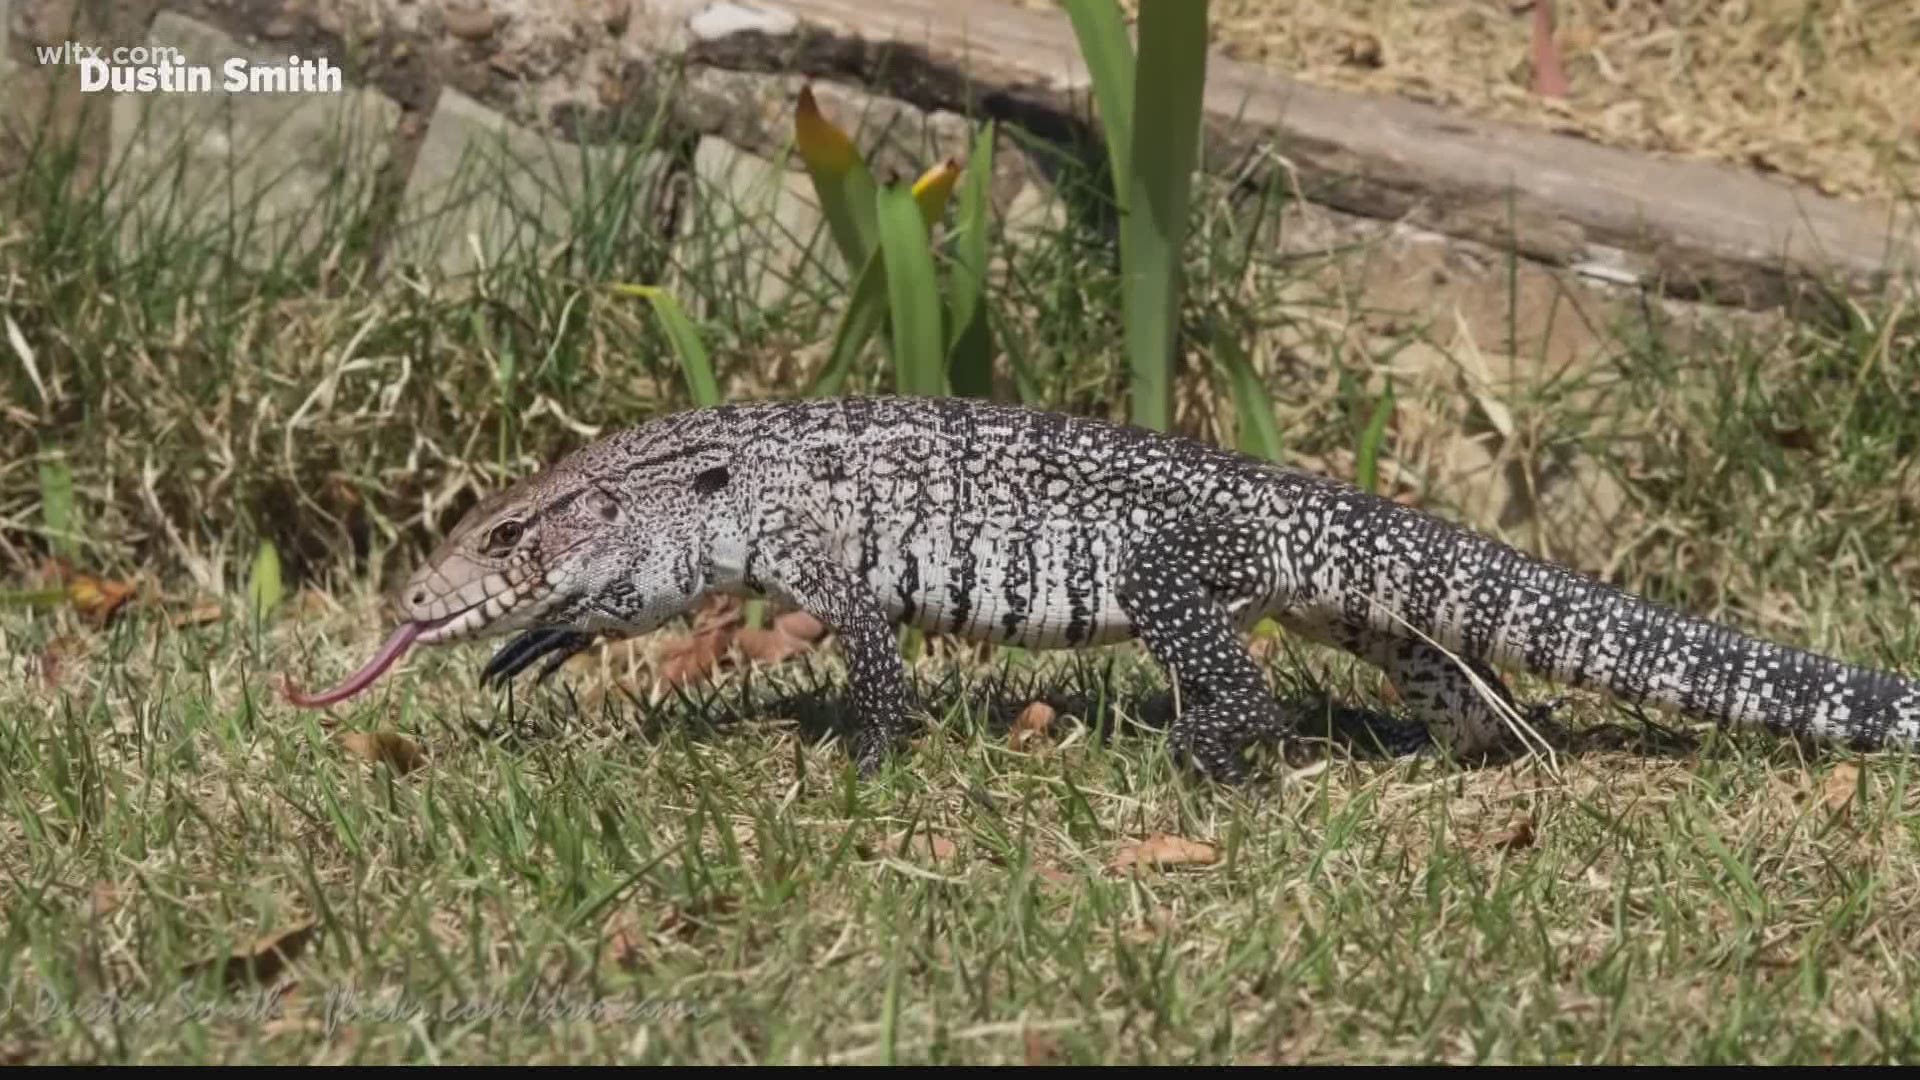 It is illegal to bring black and white Tegu Lizards into South Carolina or breed them in the state as of last Friday.